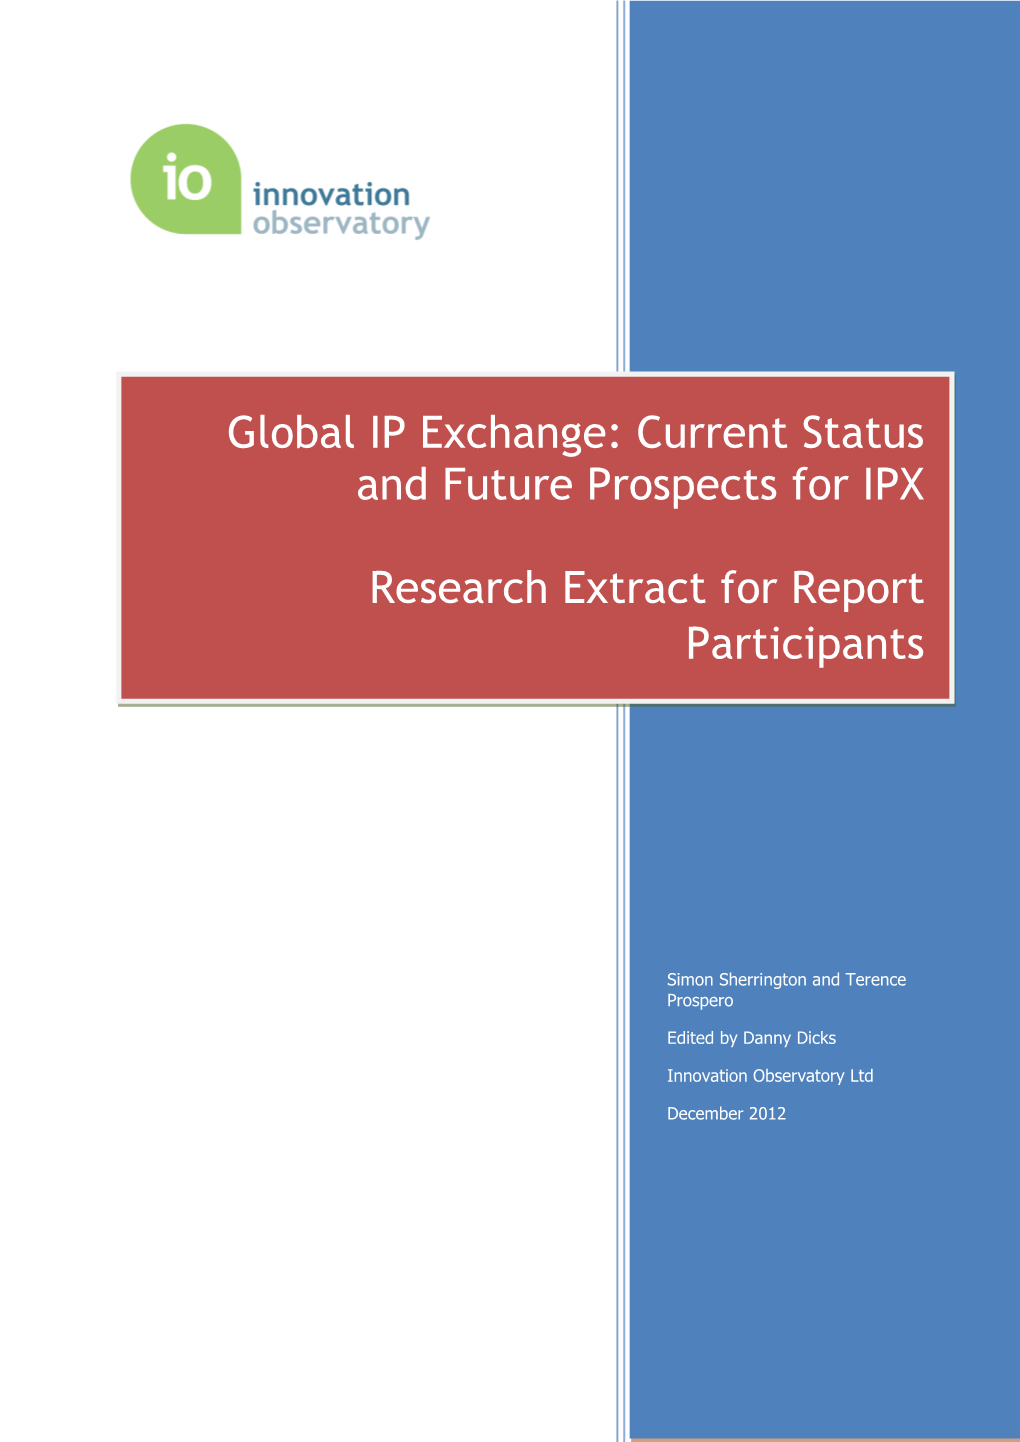 Global IP Exchange: Current Status and Future Prospects for IPX